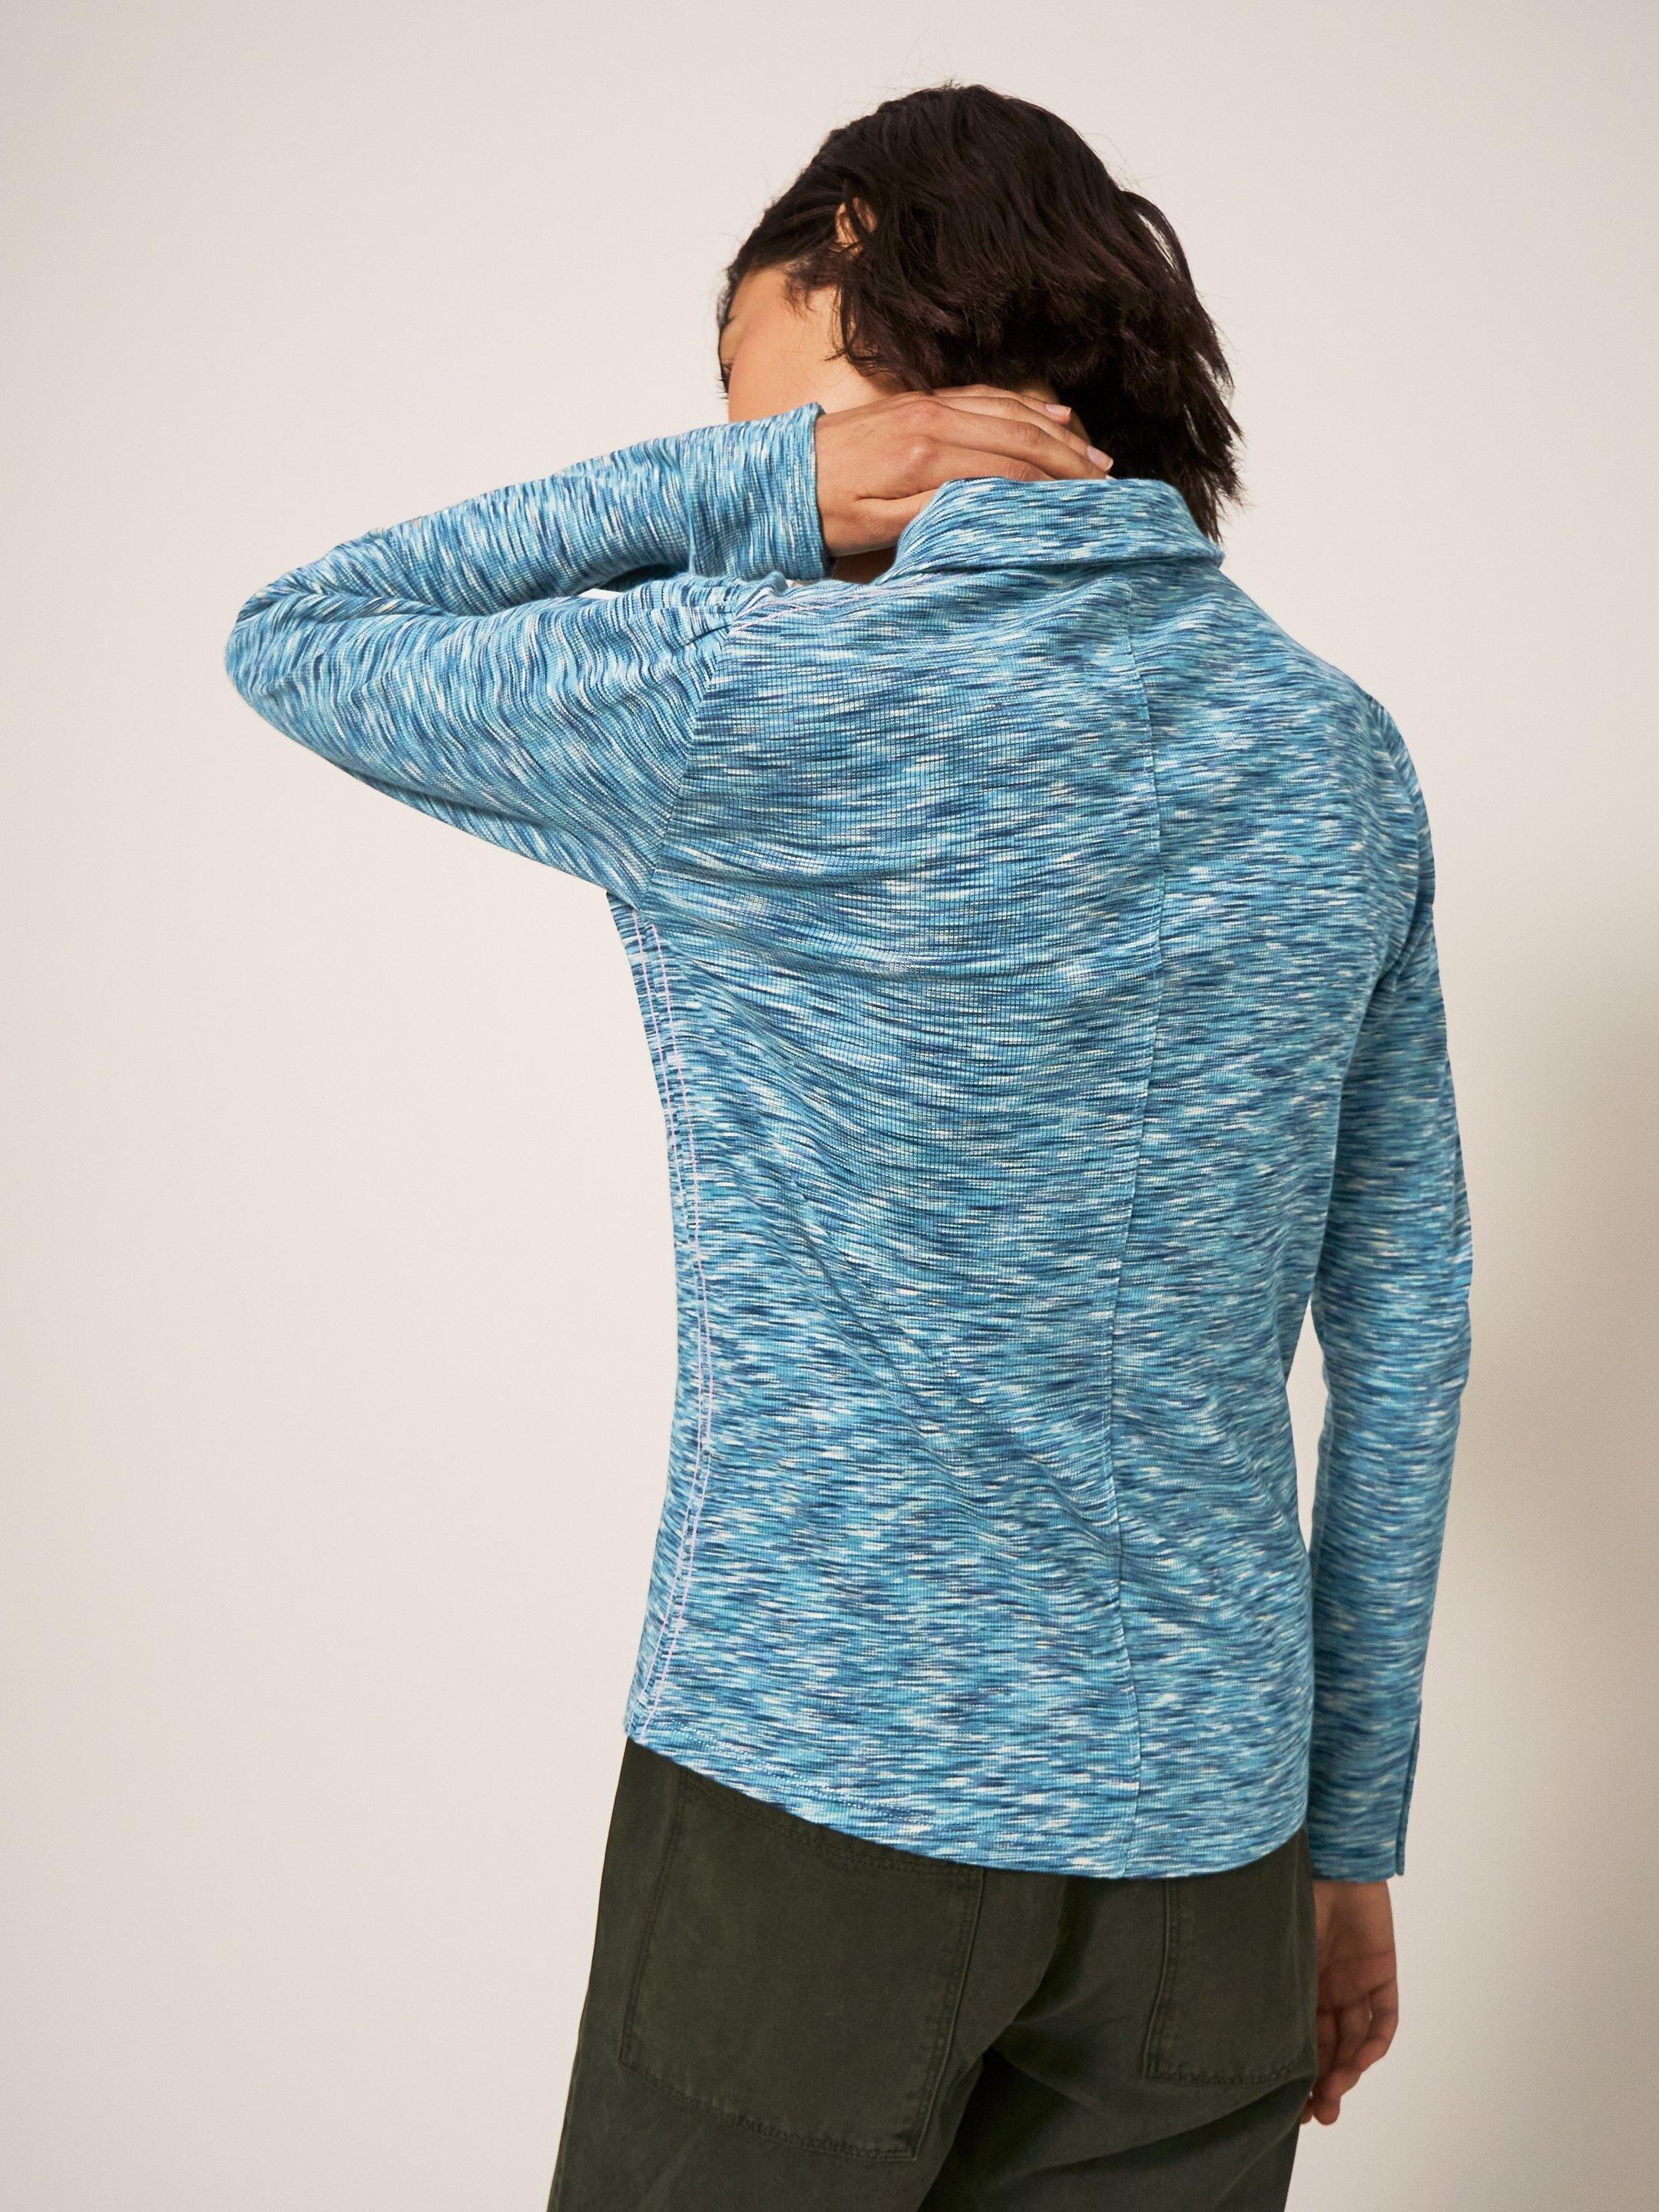 Rosie Ribbed Jersey Shirt in TEAL MLT - MODEL BACK